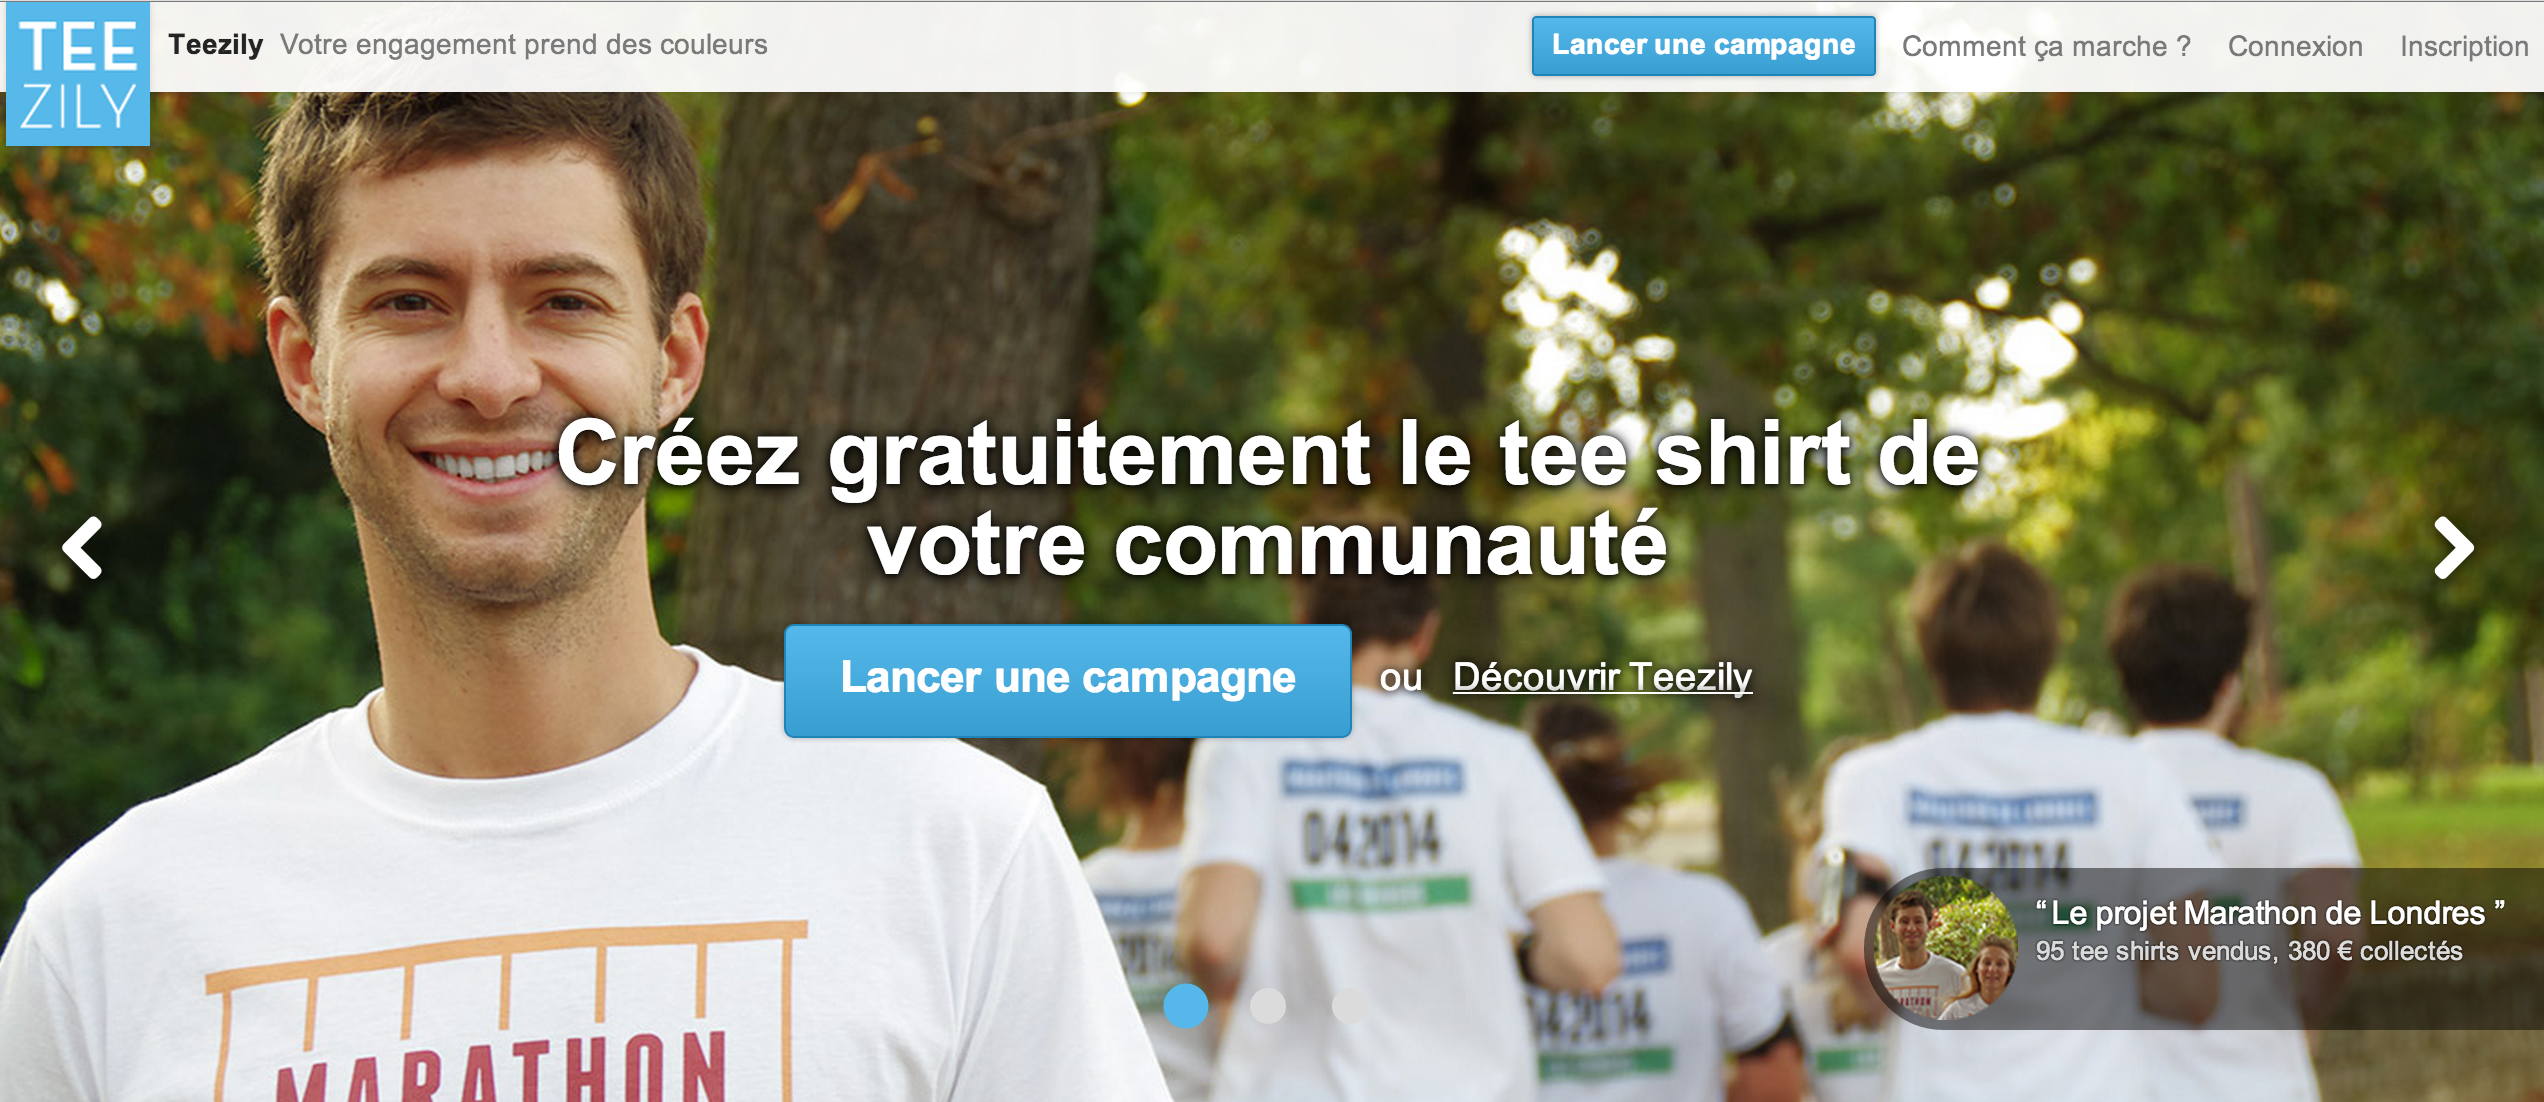 Page d'accueil Teezily Crowdfunding